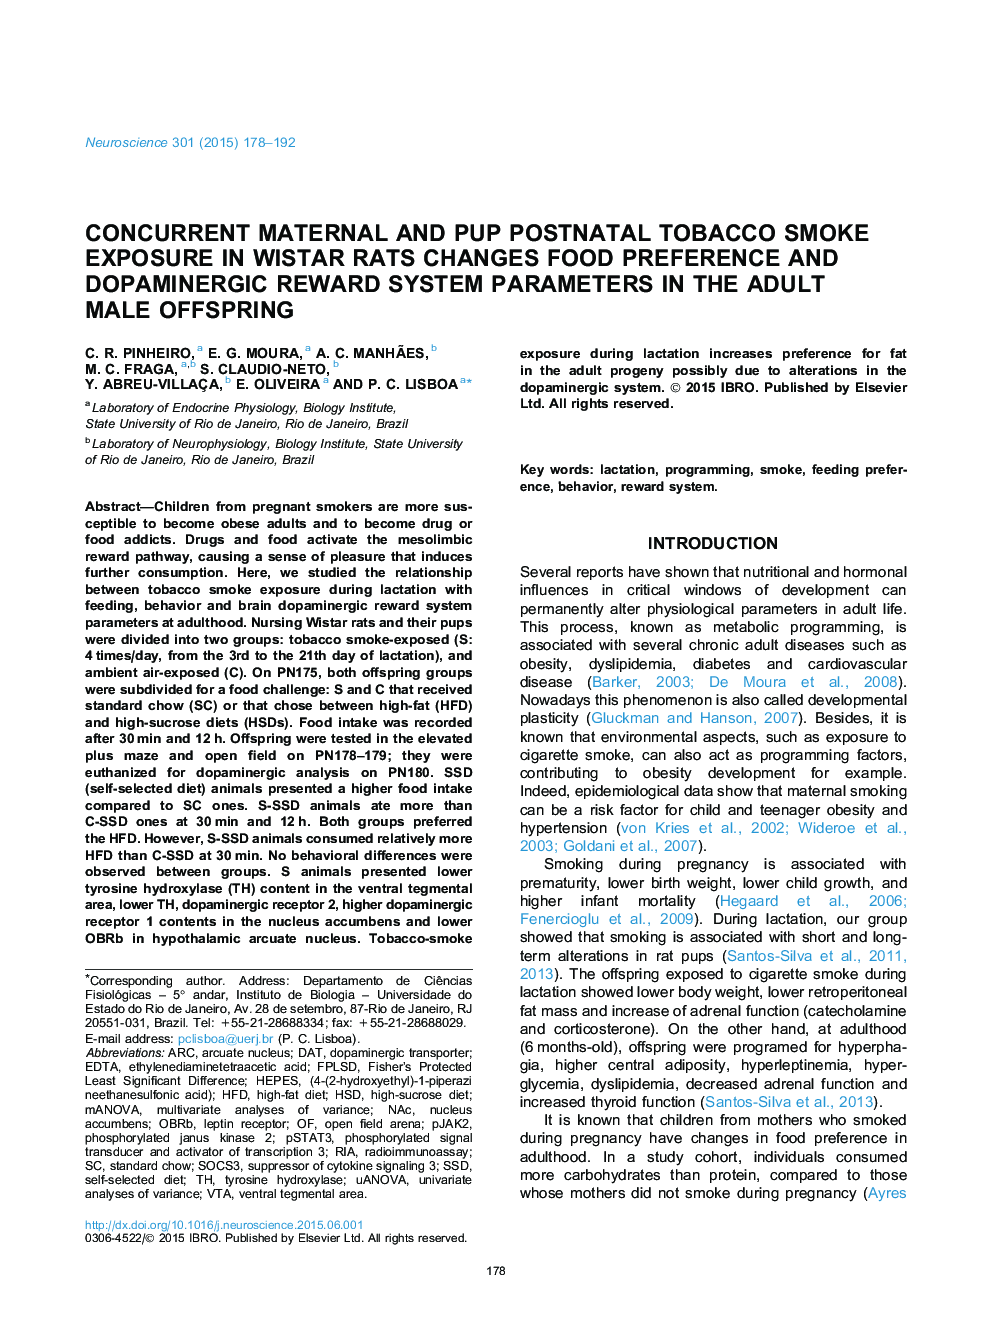 Concurrent maternal and pup postnatal tobacco smoke exposure in Wistar rats changes food preference and dopaminergic reward system parameters in the adult male offspring